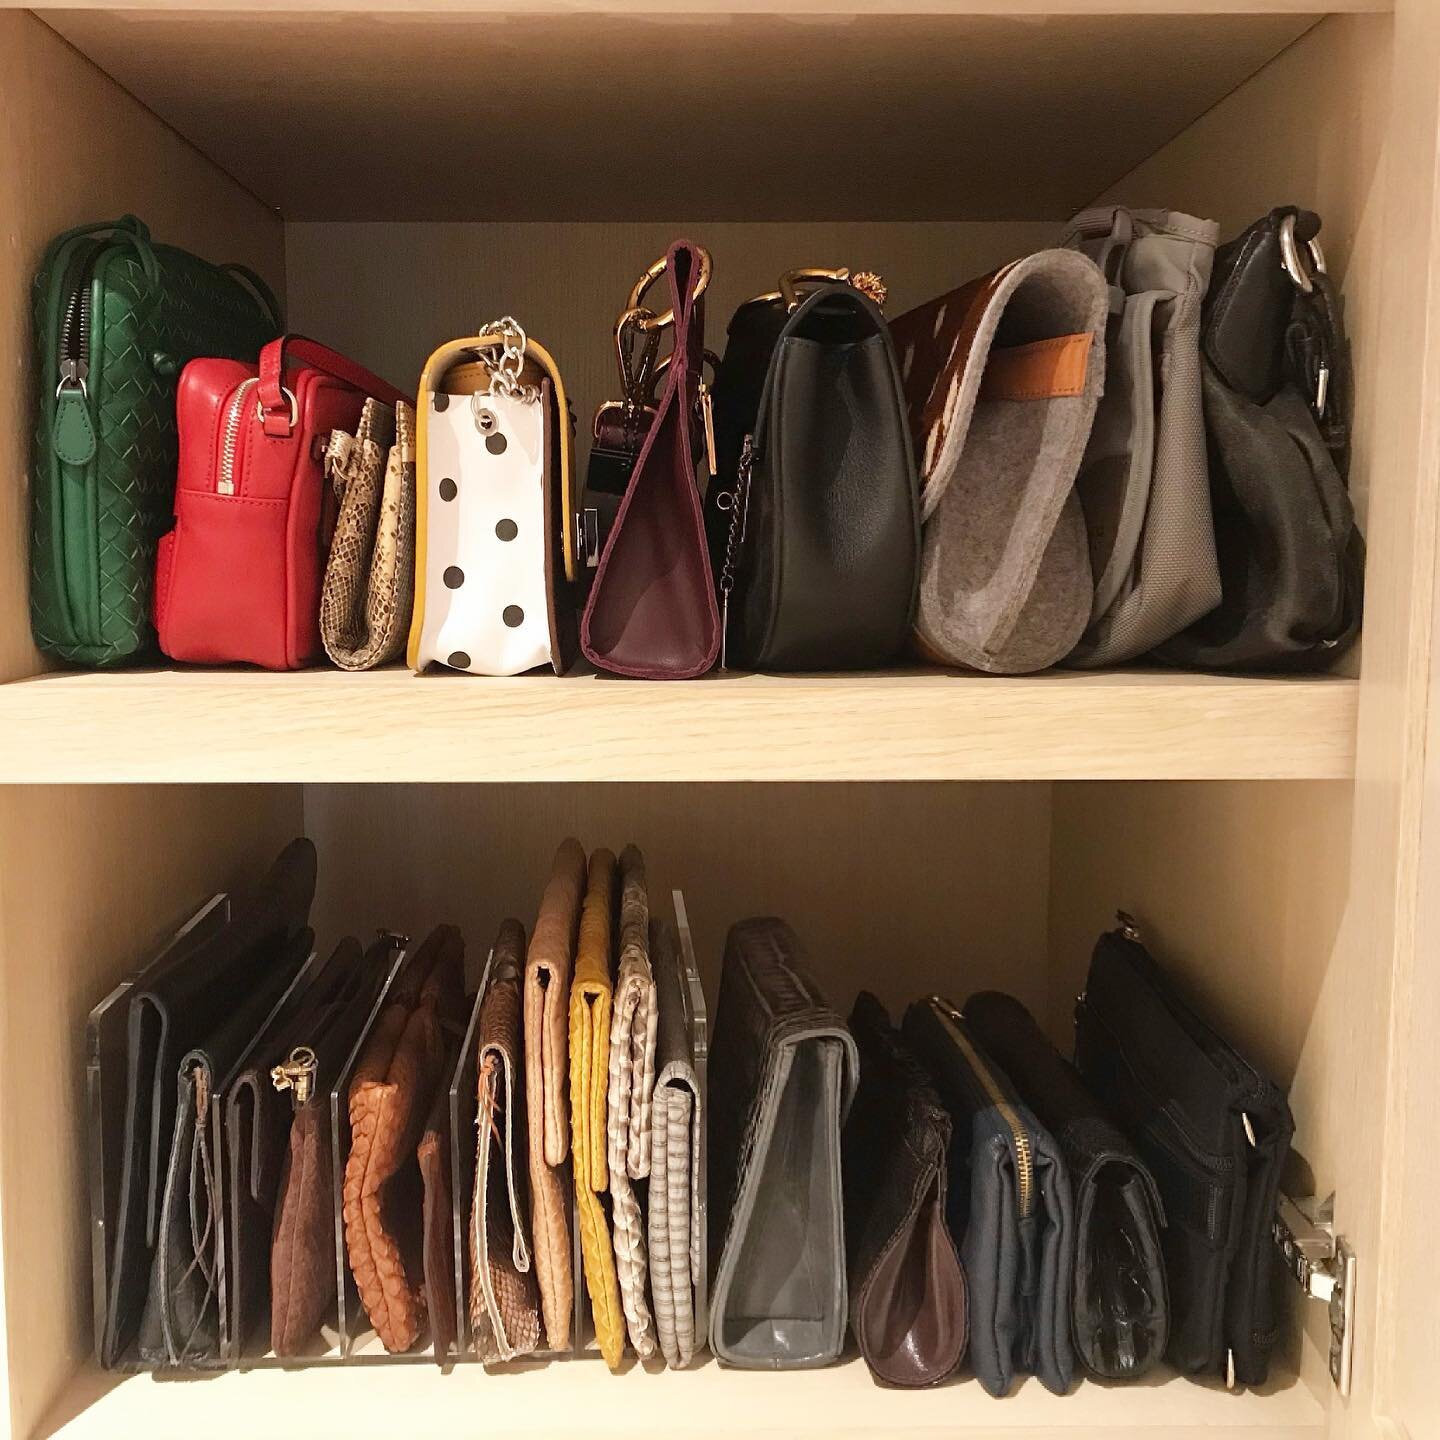 First pick the outfit, then the purse! Happy Wednesday! 👗👛
.
.
#outfit #purse #clutch #organized #organizedcloset #home #simplify #simplifyyourlife